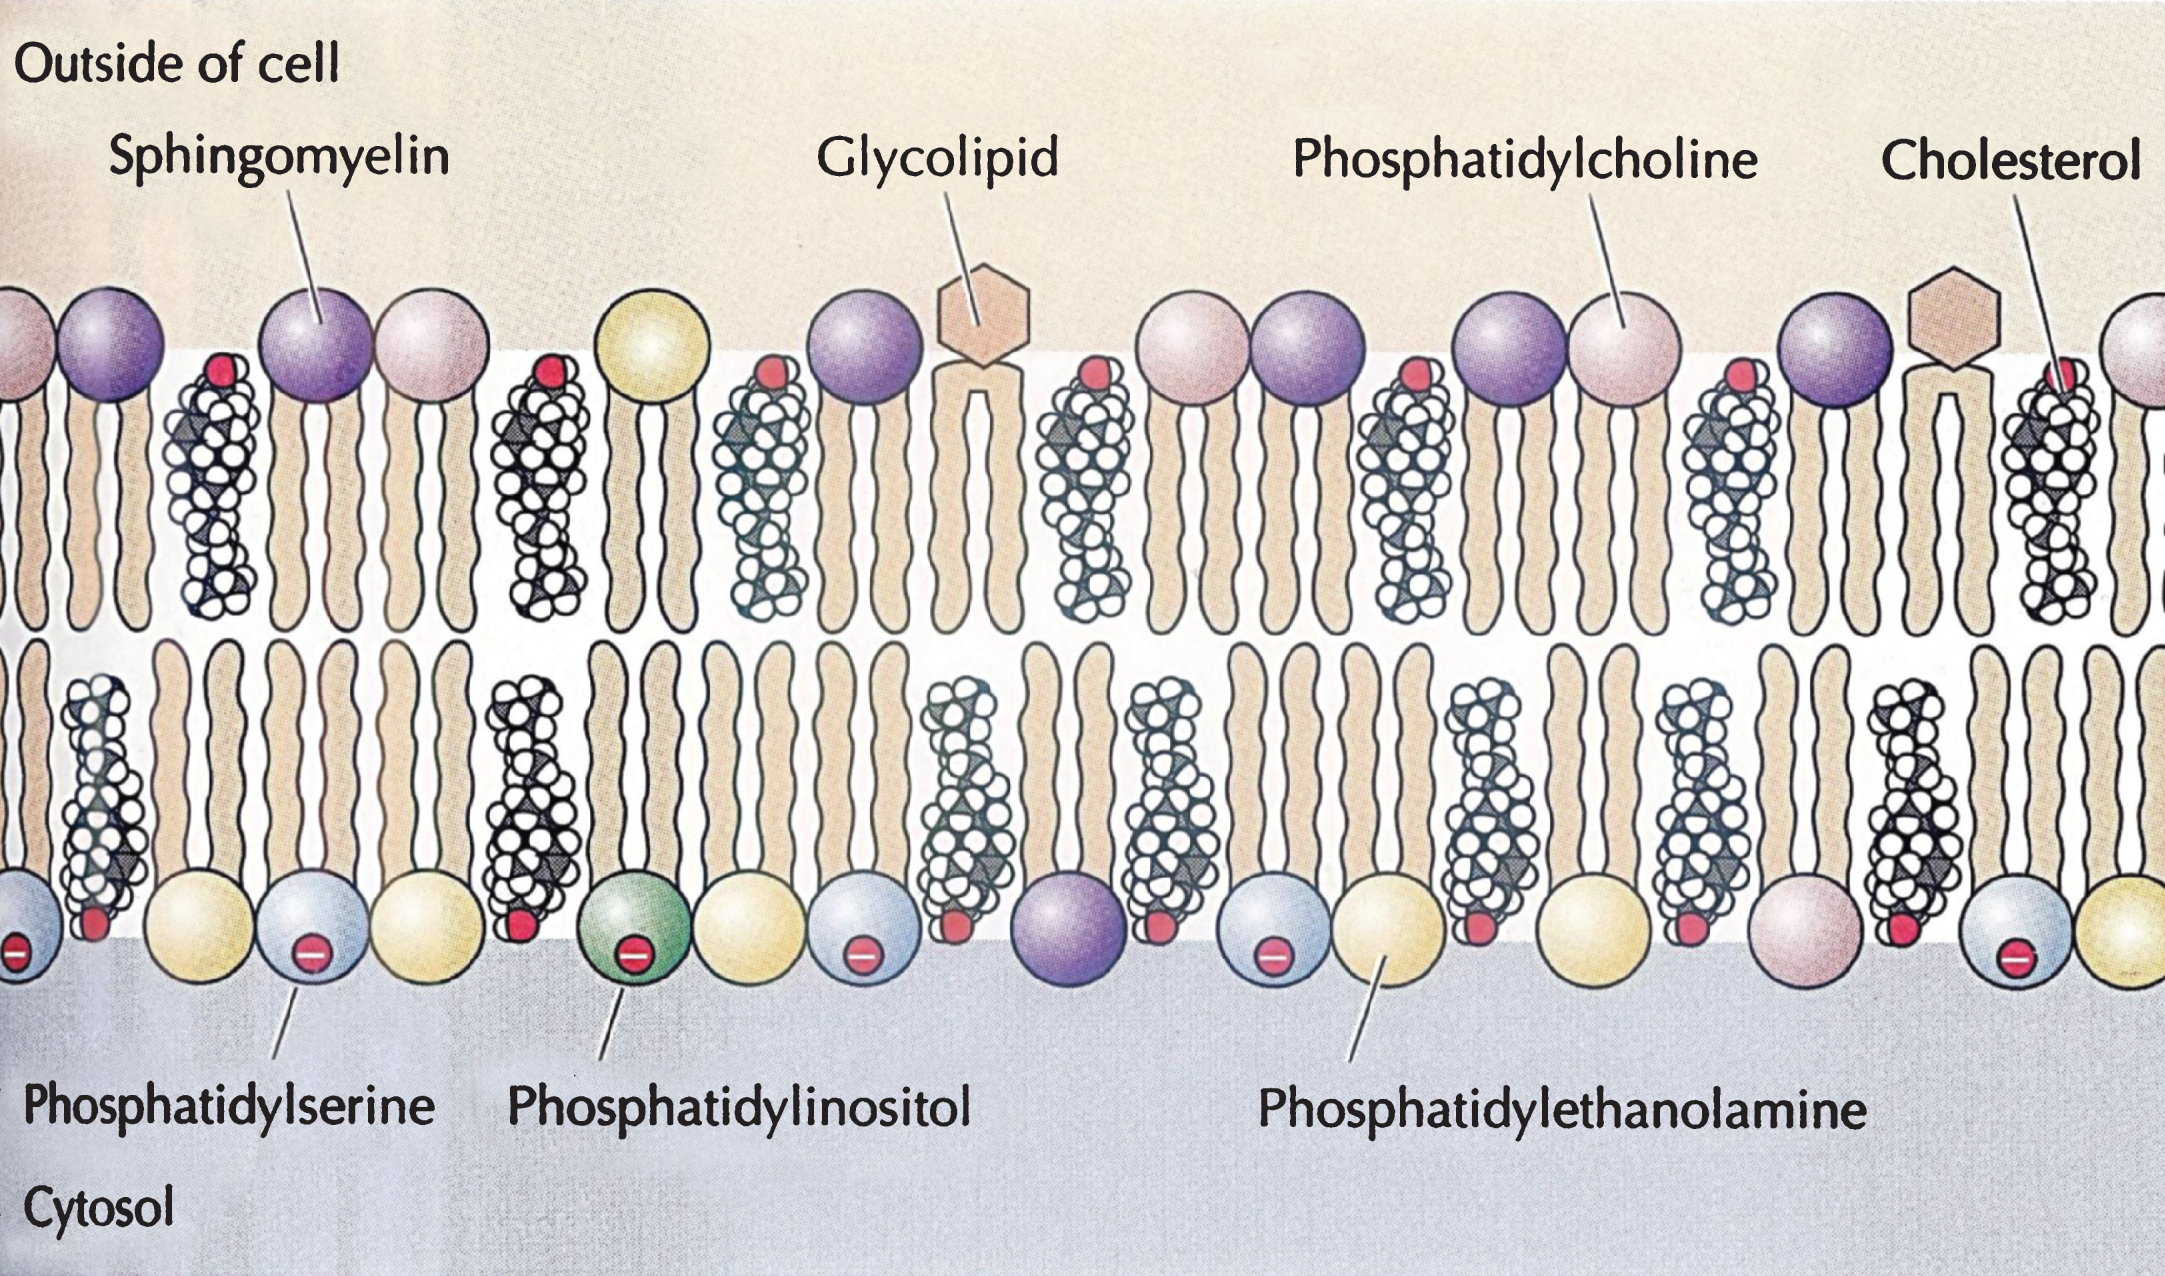 Cholesterol in the structure of the cell membrane; from Cooper, Hausman with permission.